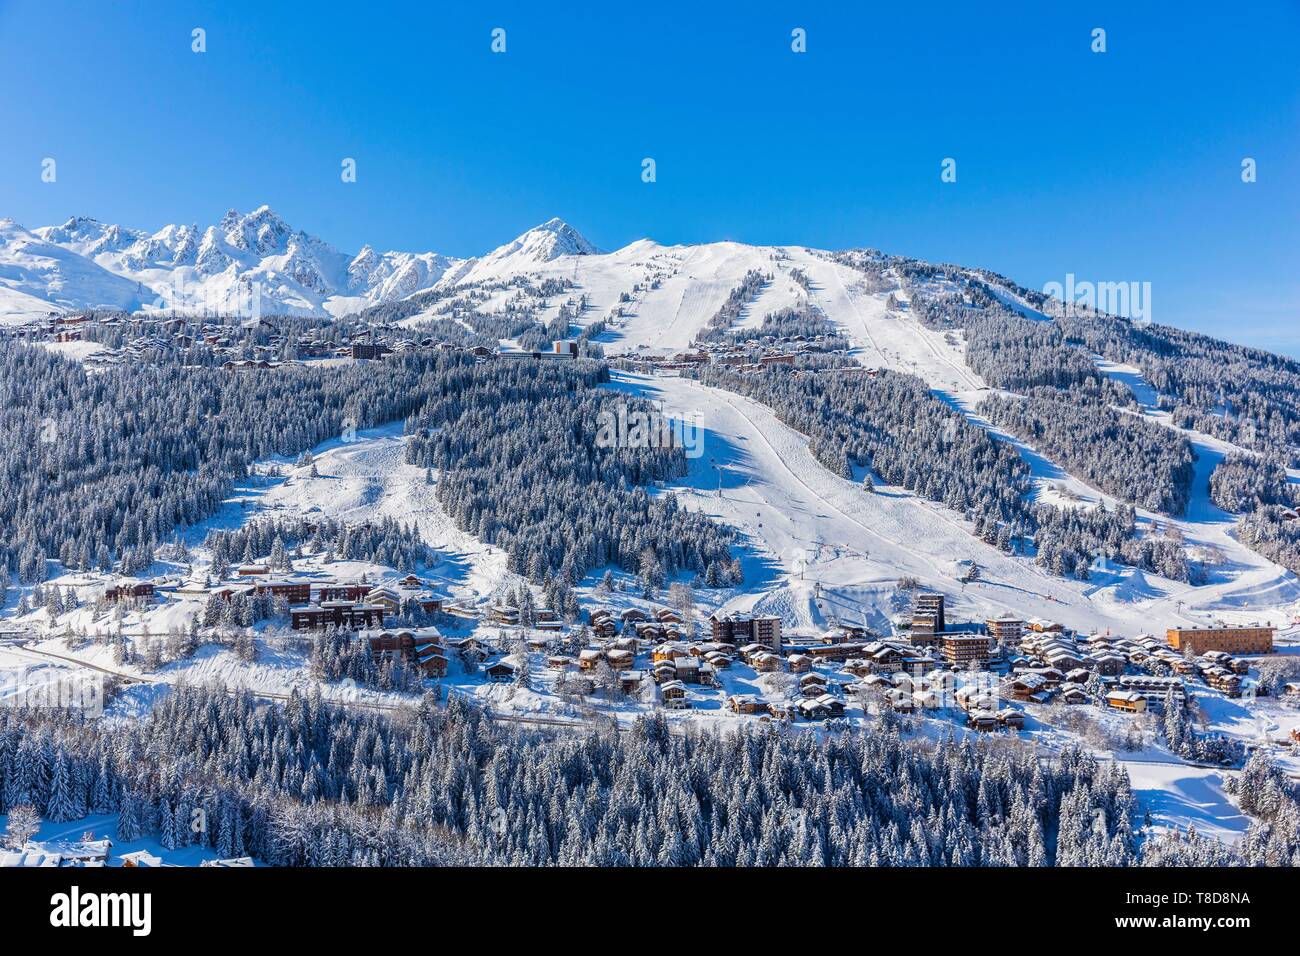 904 Courchevel Ski Resort Stock Photos, High-Res Pictures, and Images -  Getty Images